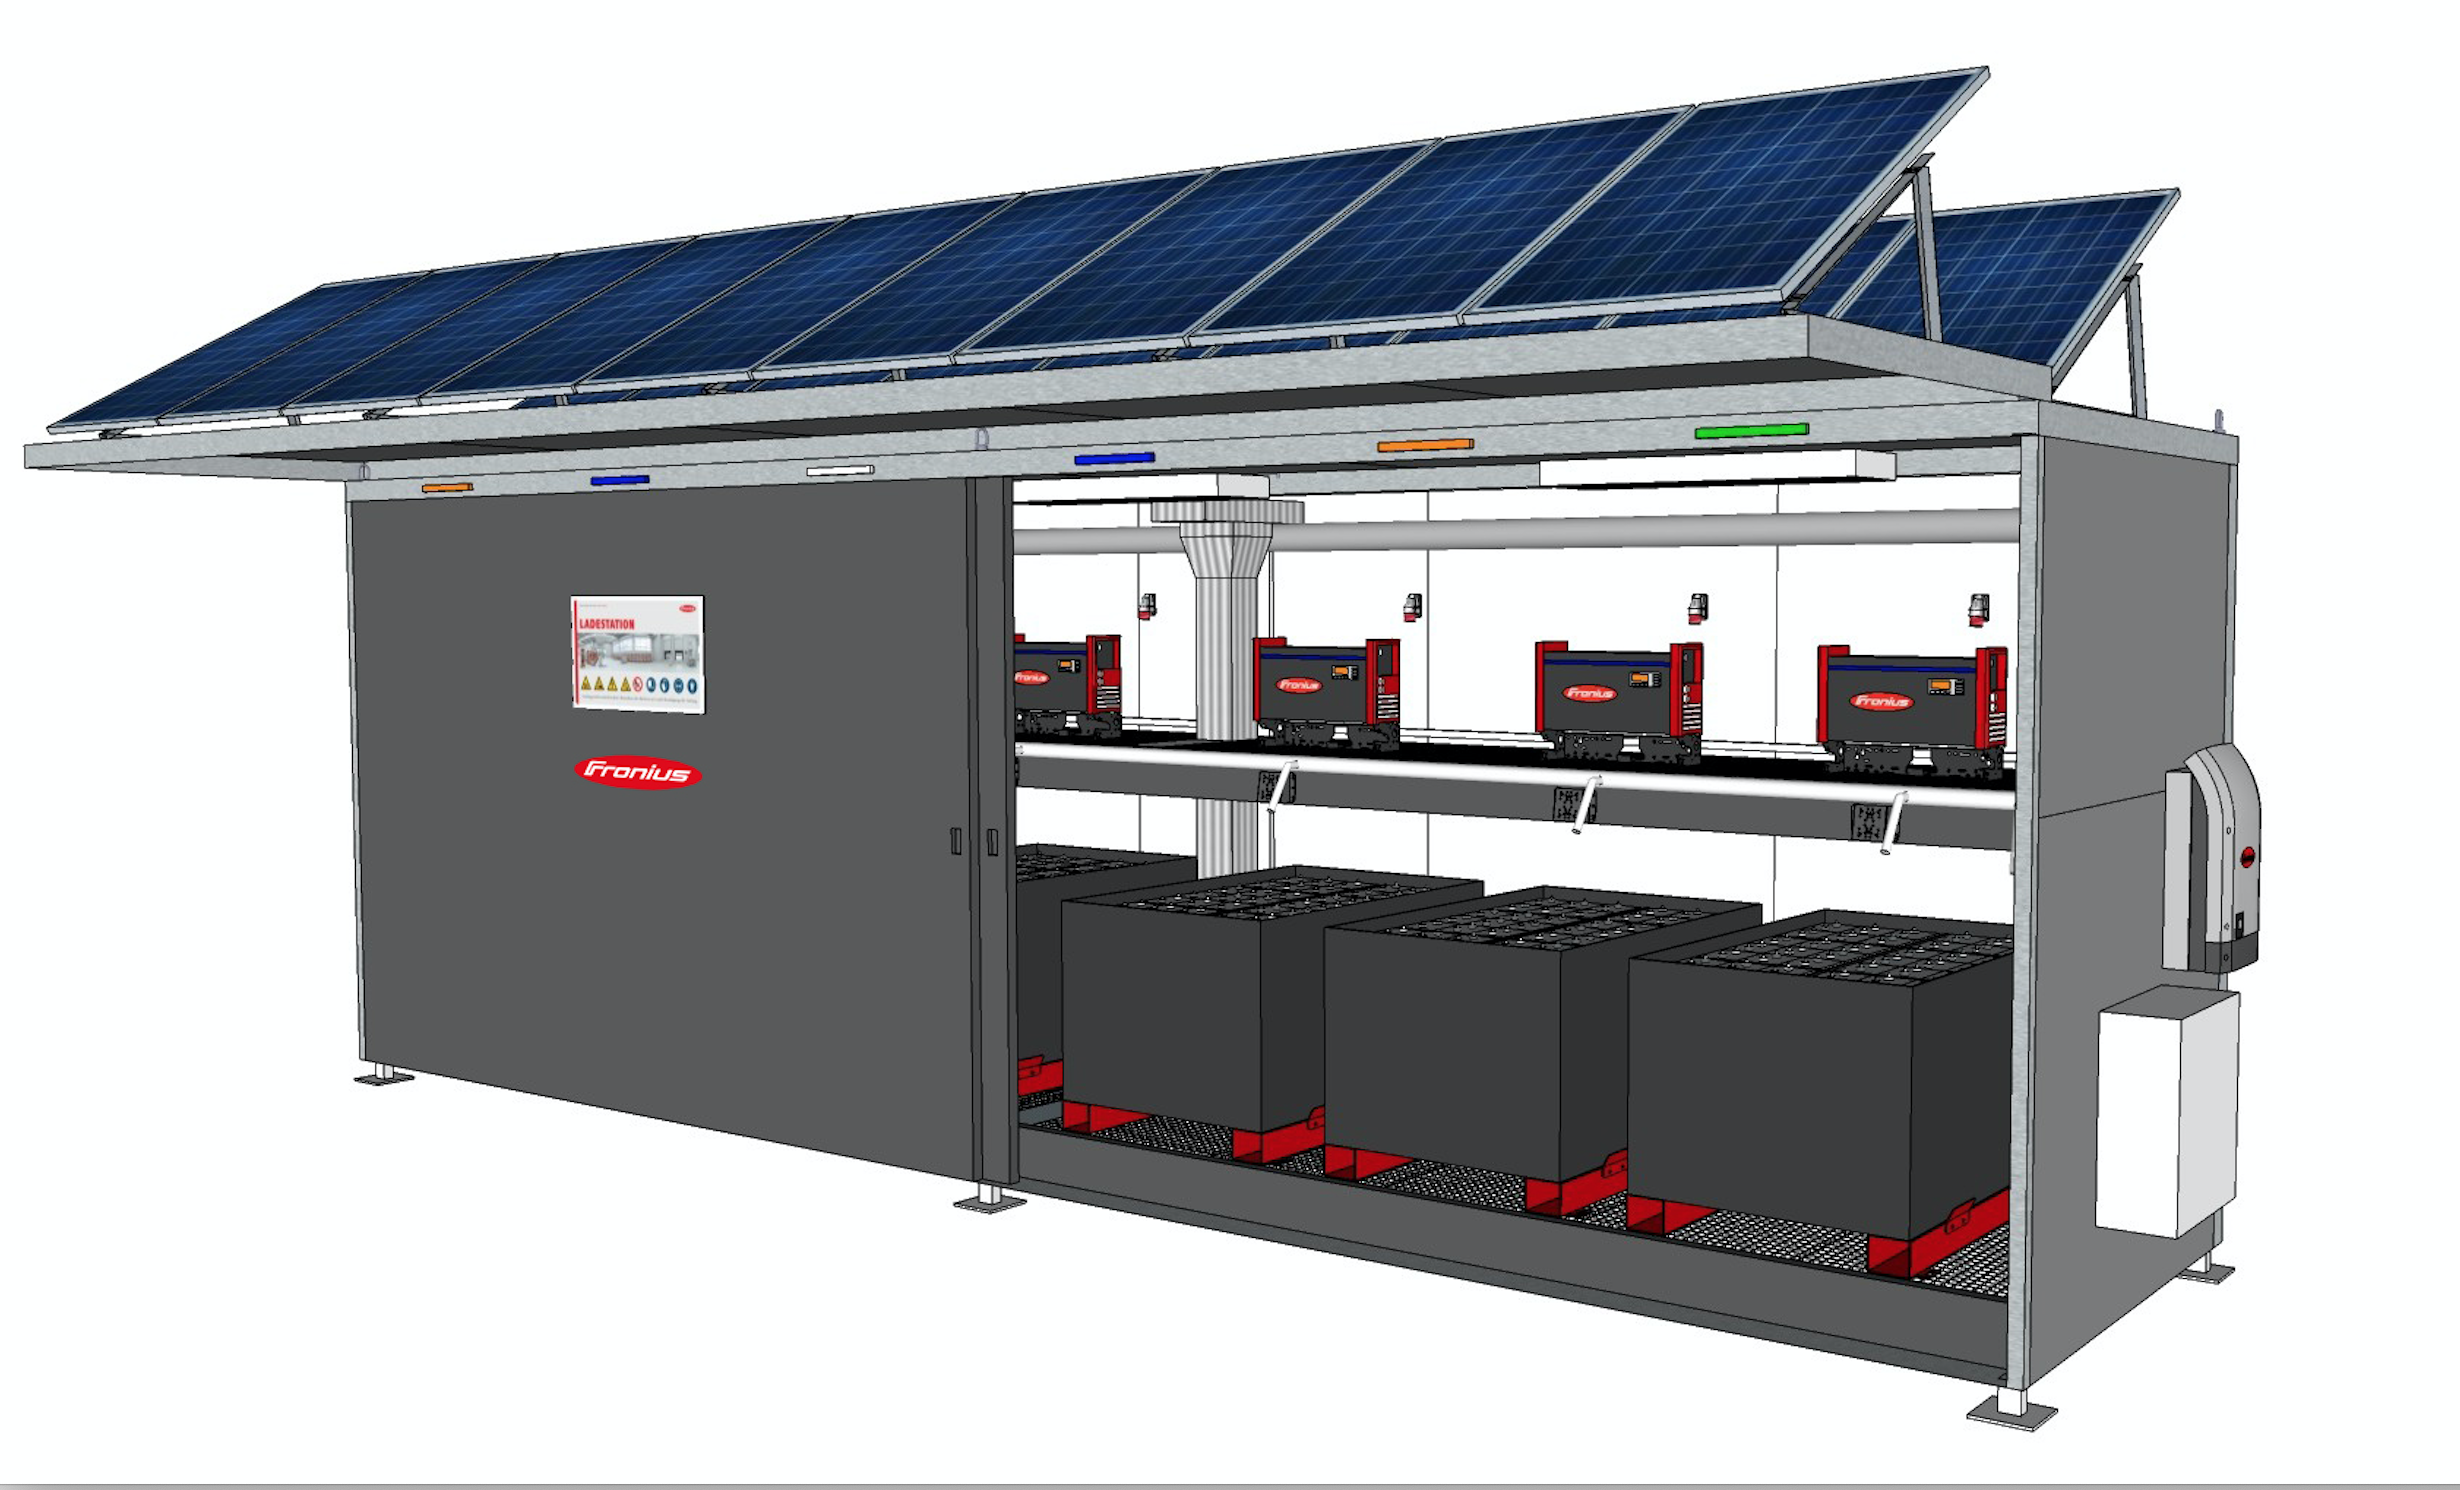 Fronius Offers Flexible Outdoor Battery Charging Industrial Vehicle Technology International